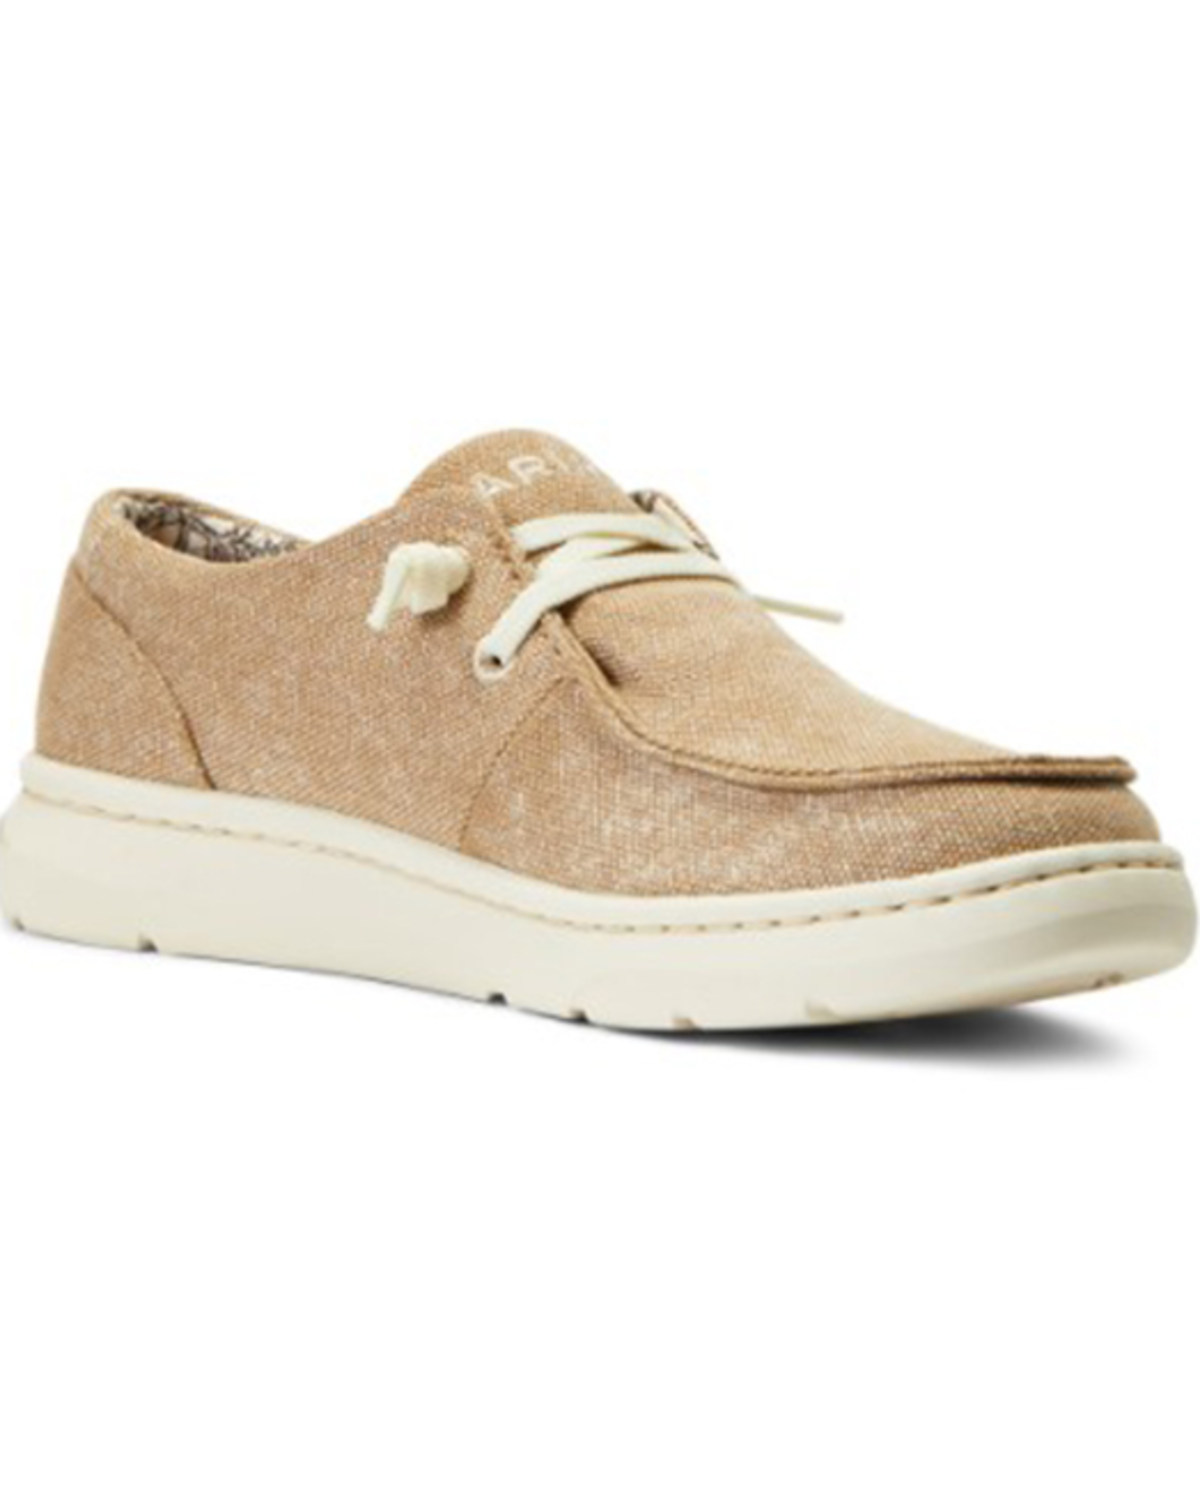 Ariat Women's Canvas Washed Full Vamp Casual Hilo - Moc Toe